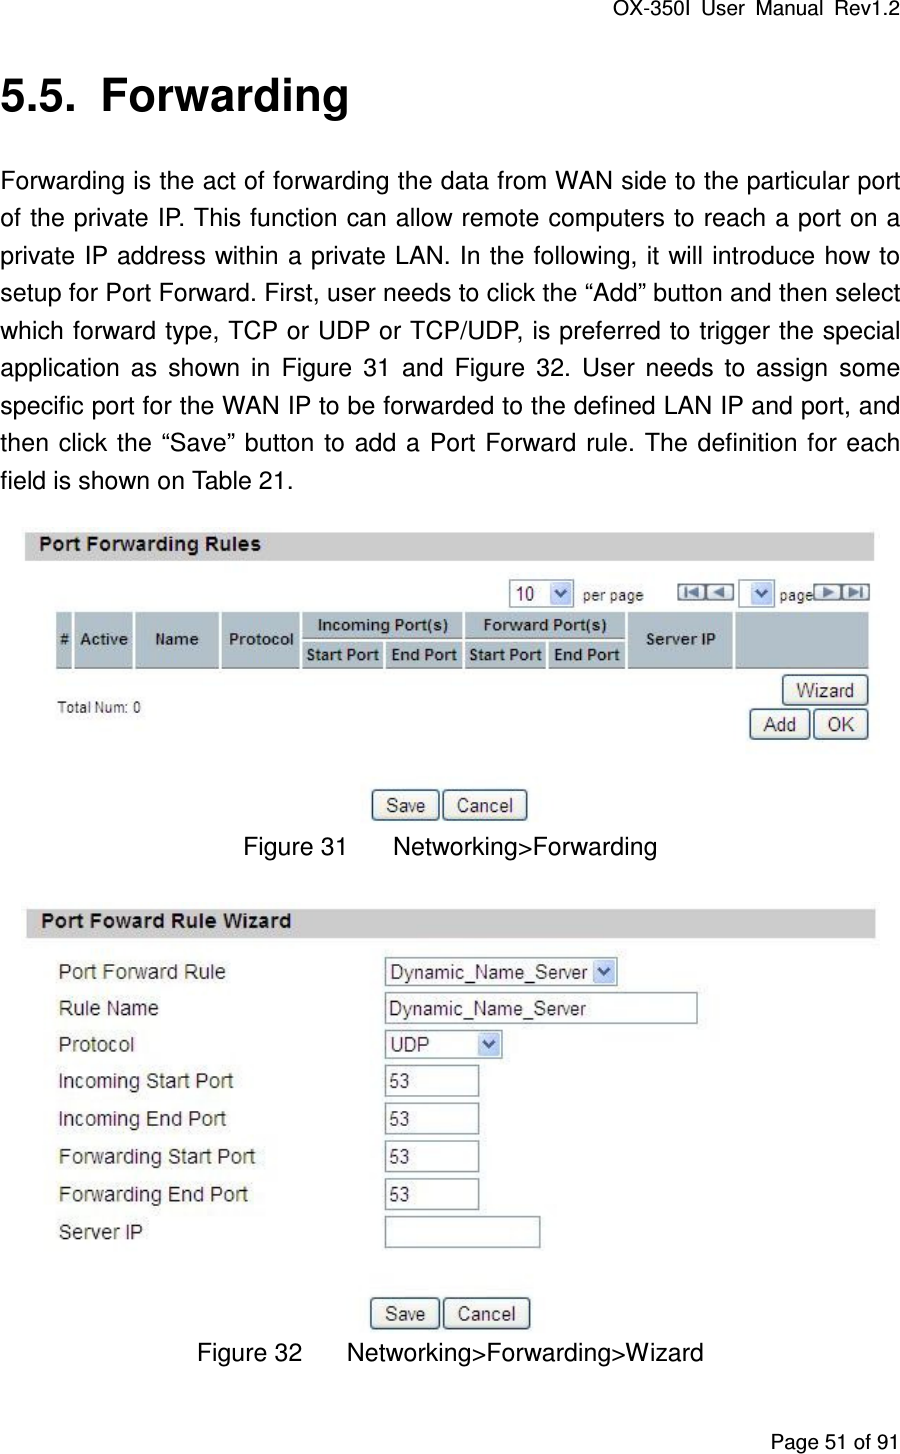 OX-350I  User  Manual  Rev1.2 Page 51 of 91 5.5.  Forwarding Forwarding is the act of forwarding the data from WAN side to the particular port of the private IP. This function can allow remote computers to reach a port on a private IP address within a private LAN. In the following, it will introduce how to setup for Port Forward. First, user needs to click the “Add” button and then select which forward type, TCP or UDP or TCP/UDP, is preferred to trigger the special application  as  shown  in  Figure  31  and  Figure  32.  User  needs  to  assign  some specific port for the WAN IP to be forwarded to the defined LAN IP and port, and then  click the “Save” button  to add a  Port  Forward rule. The definition for each field is shown on Table 21.  Figure 31  Networking&gt;Forwarding  Figure 32  Networking&gt;Forwarding&gt;Wizard 